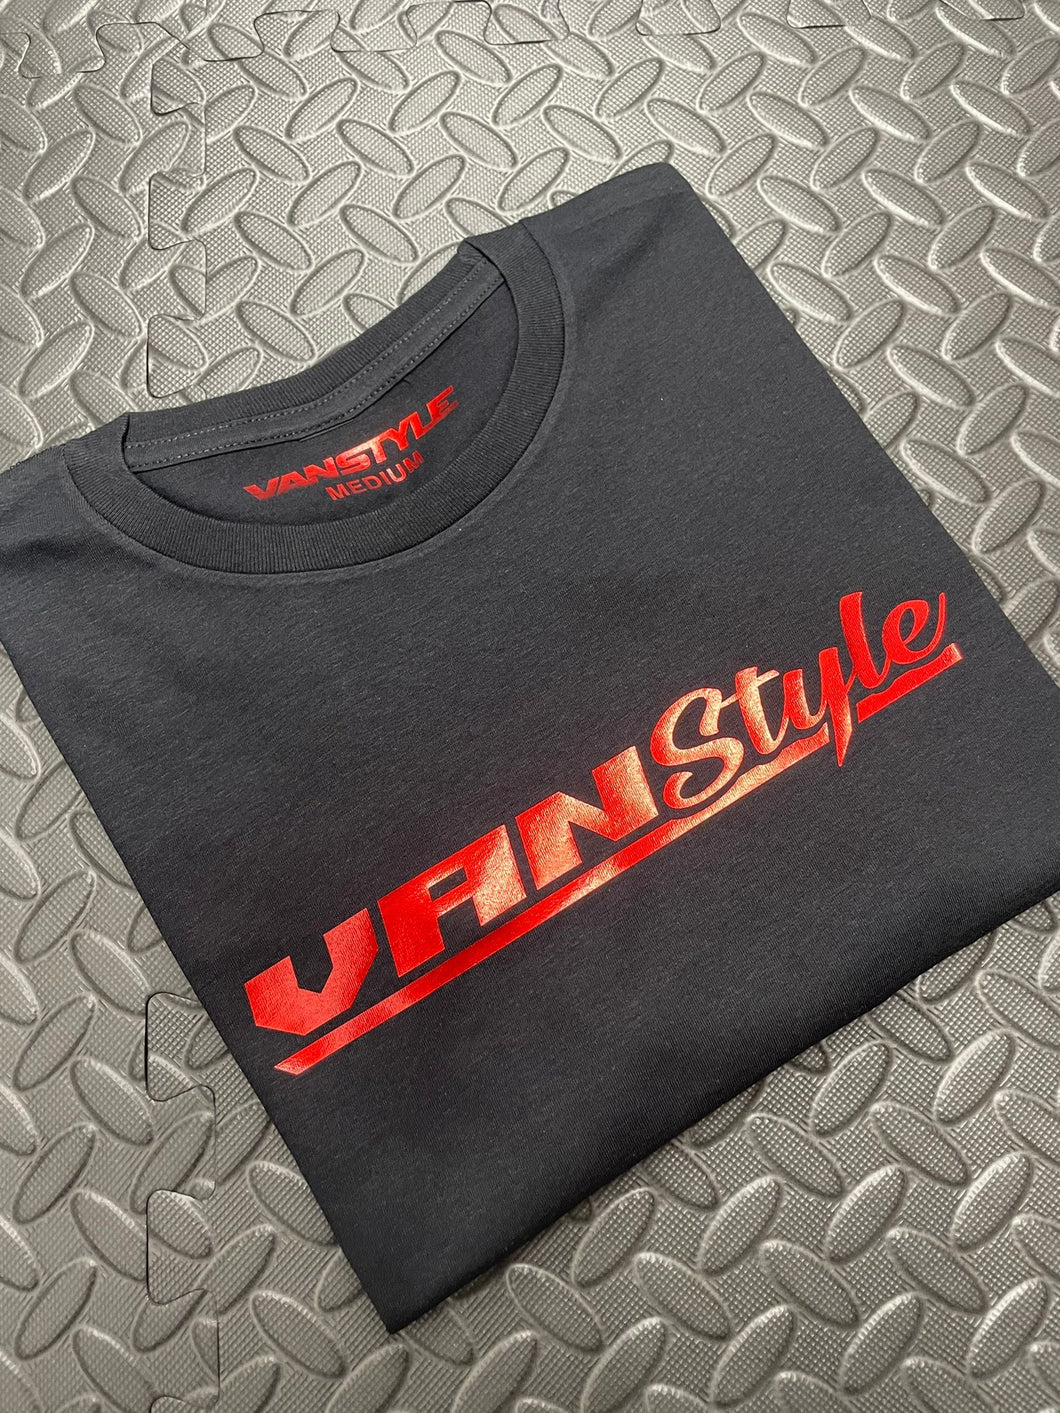 VanStyle Banner Tee Chrome Red